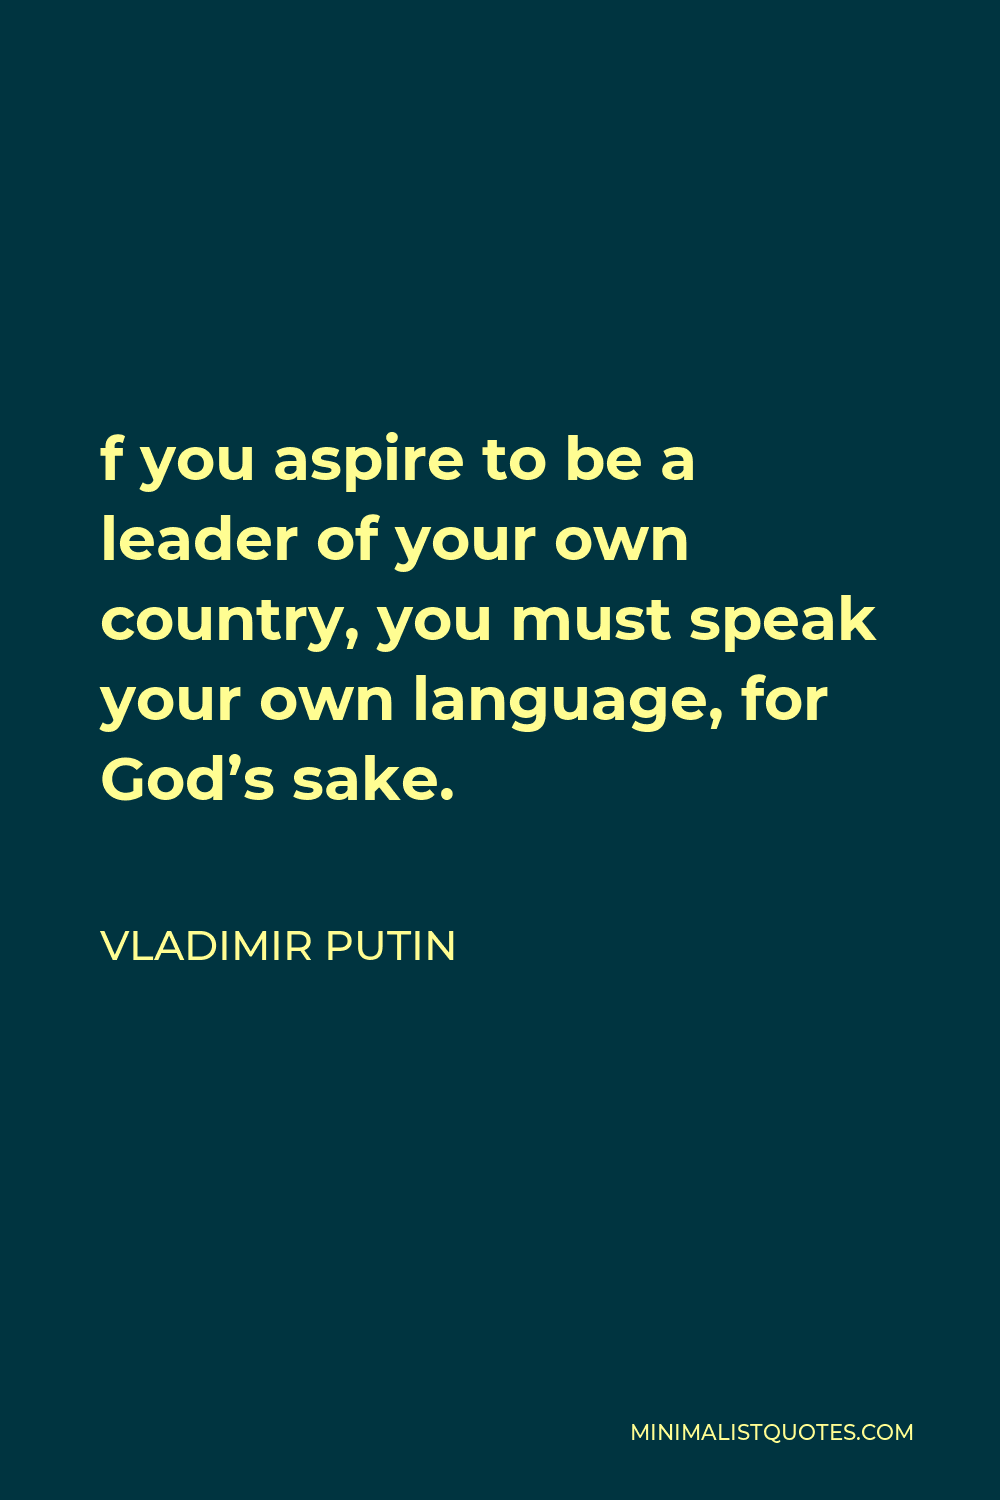 Vladimir Putin Quote - f you aspire to be a leader of your own country, you must speak your own language, for God’s sake.